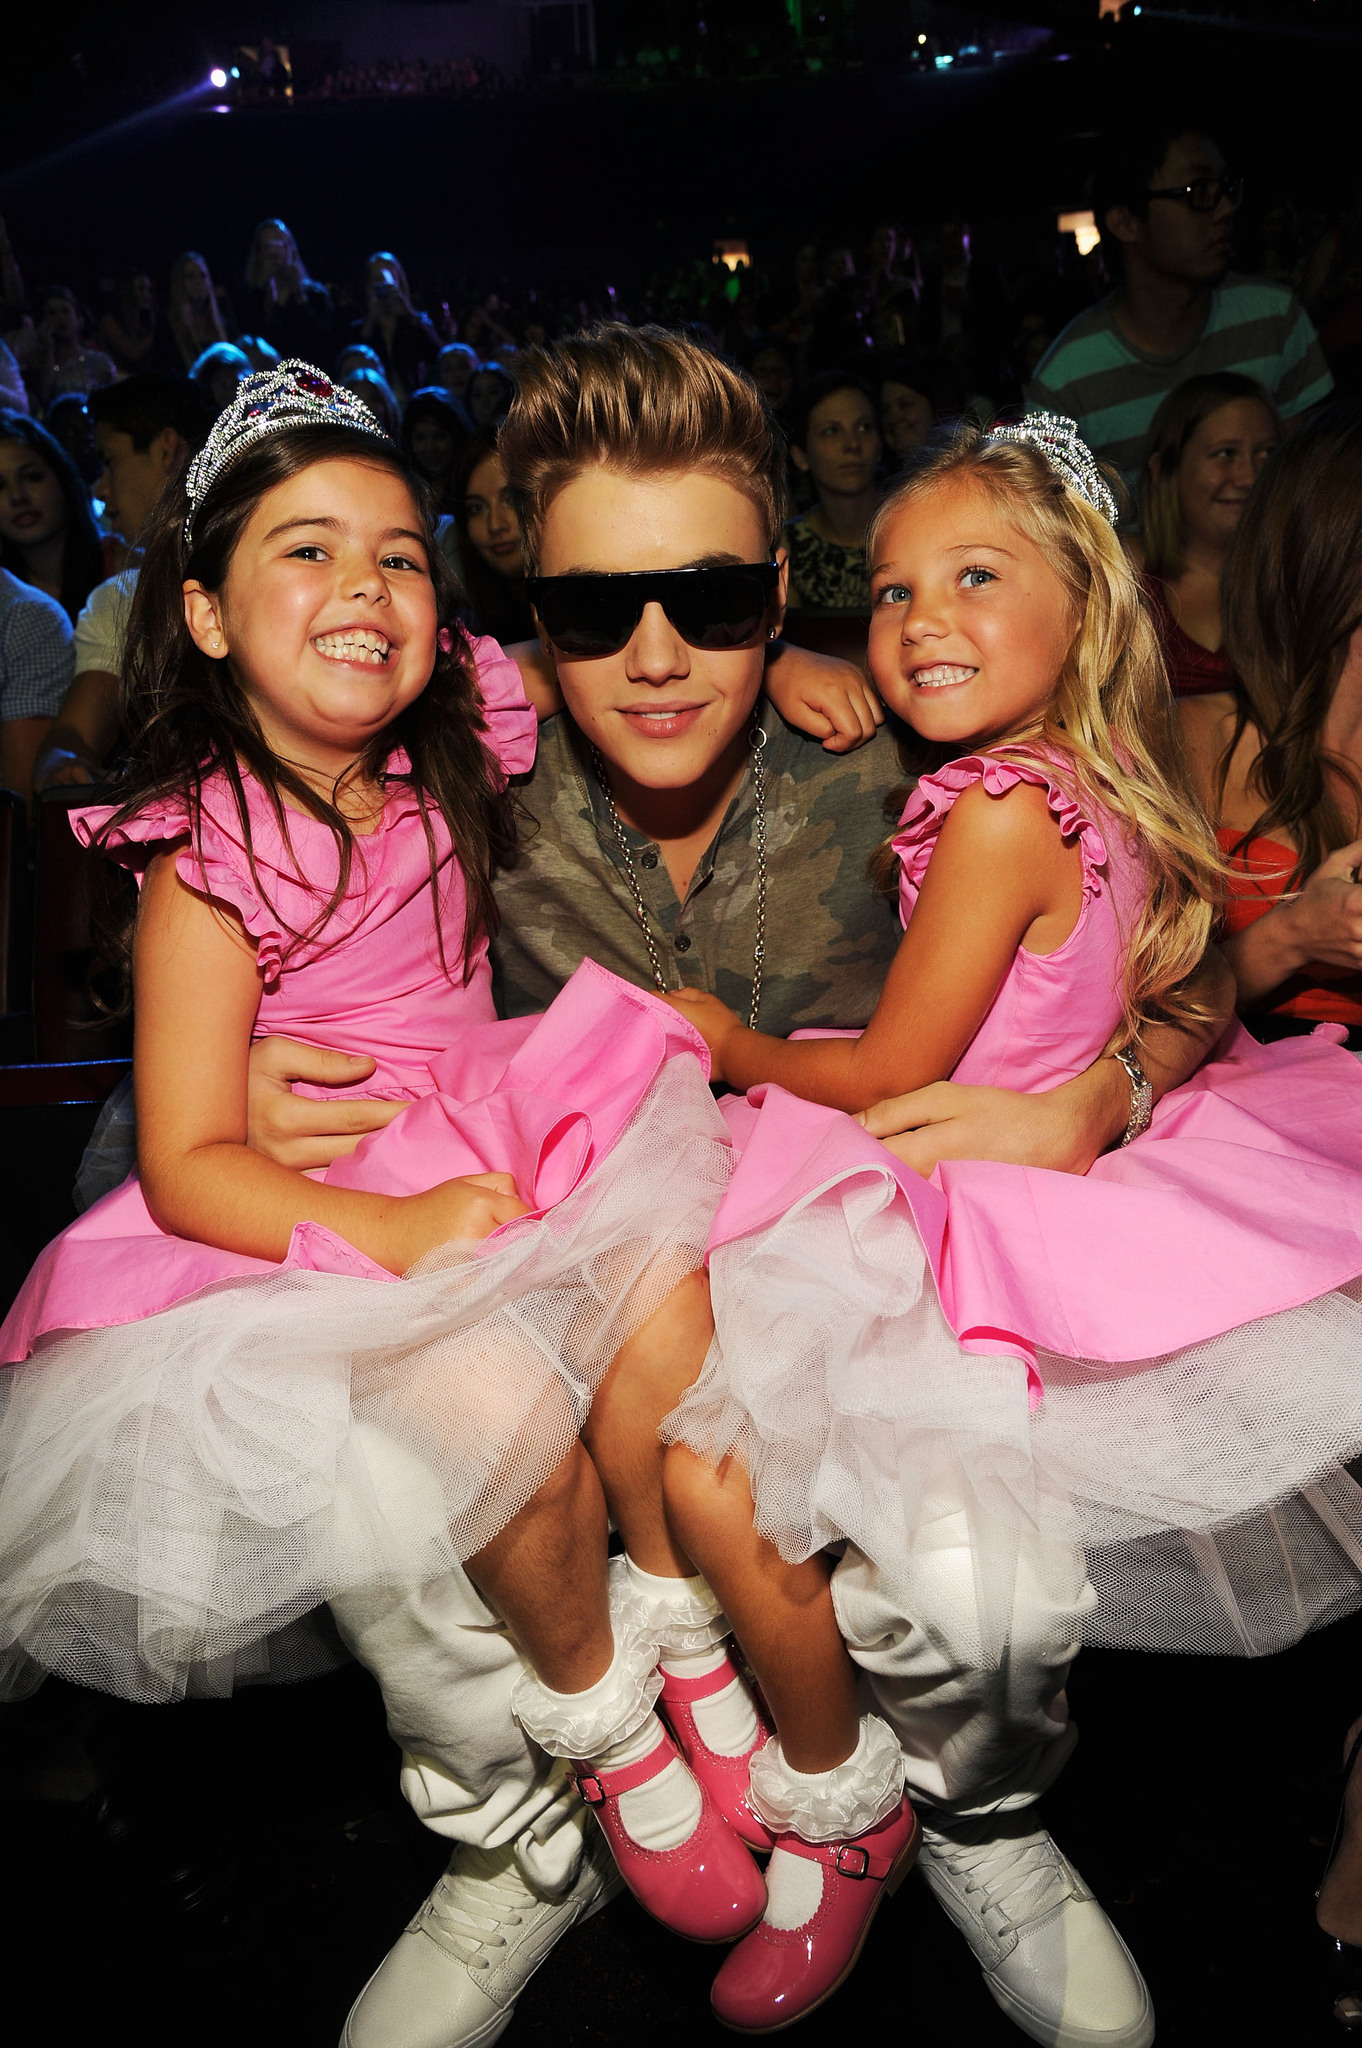 Justin Bieber, Sophia Grace Brownlee and Rosie McClelland at event of Teen Choice Awards 2012 (2012)